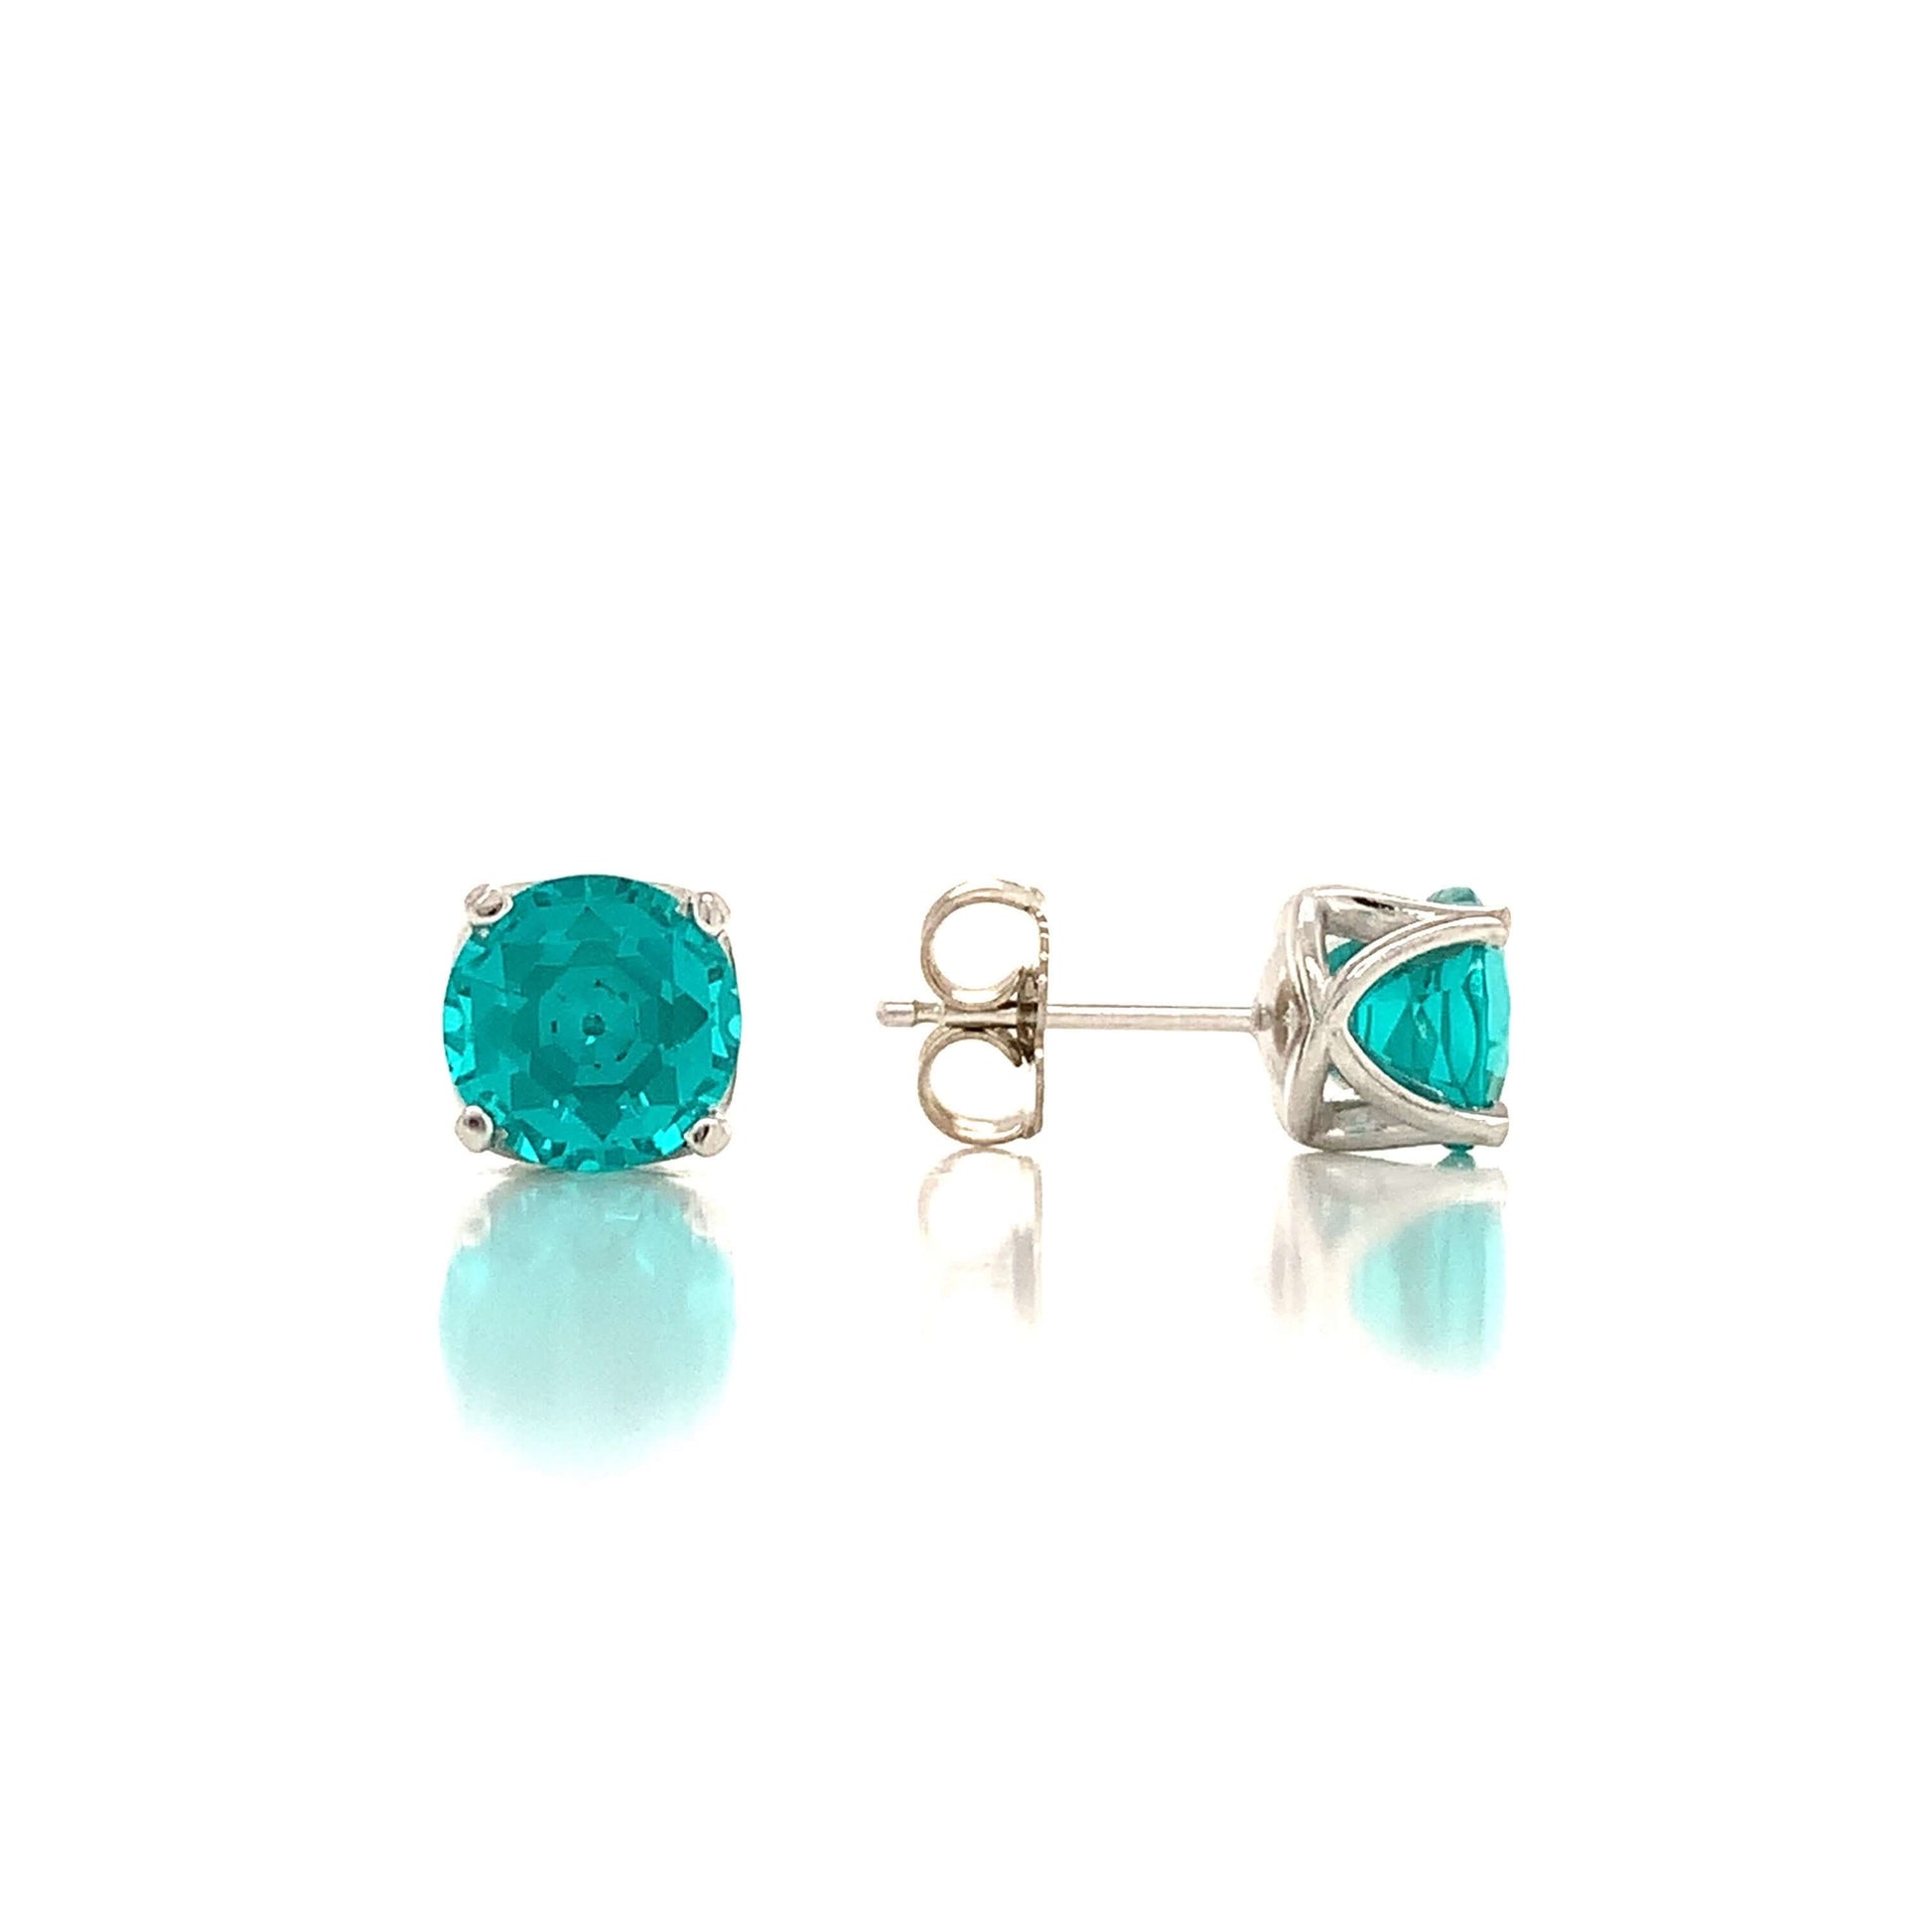 14K White 4 Prong Round Lab Grown Paraiba Doublet Set in Classic Gold Basket Earring Mountings | Earrings